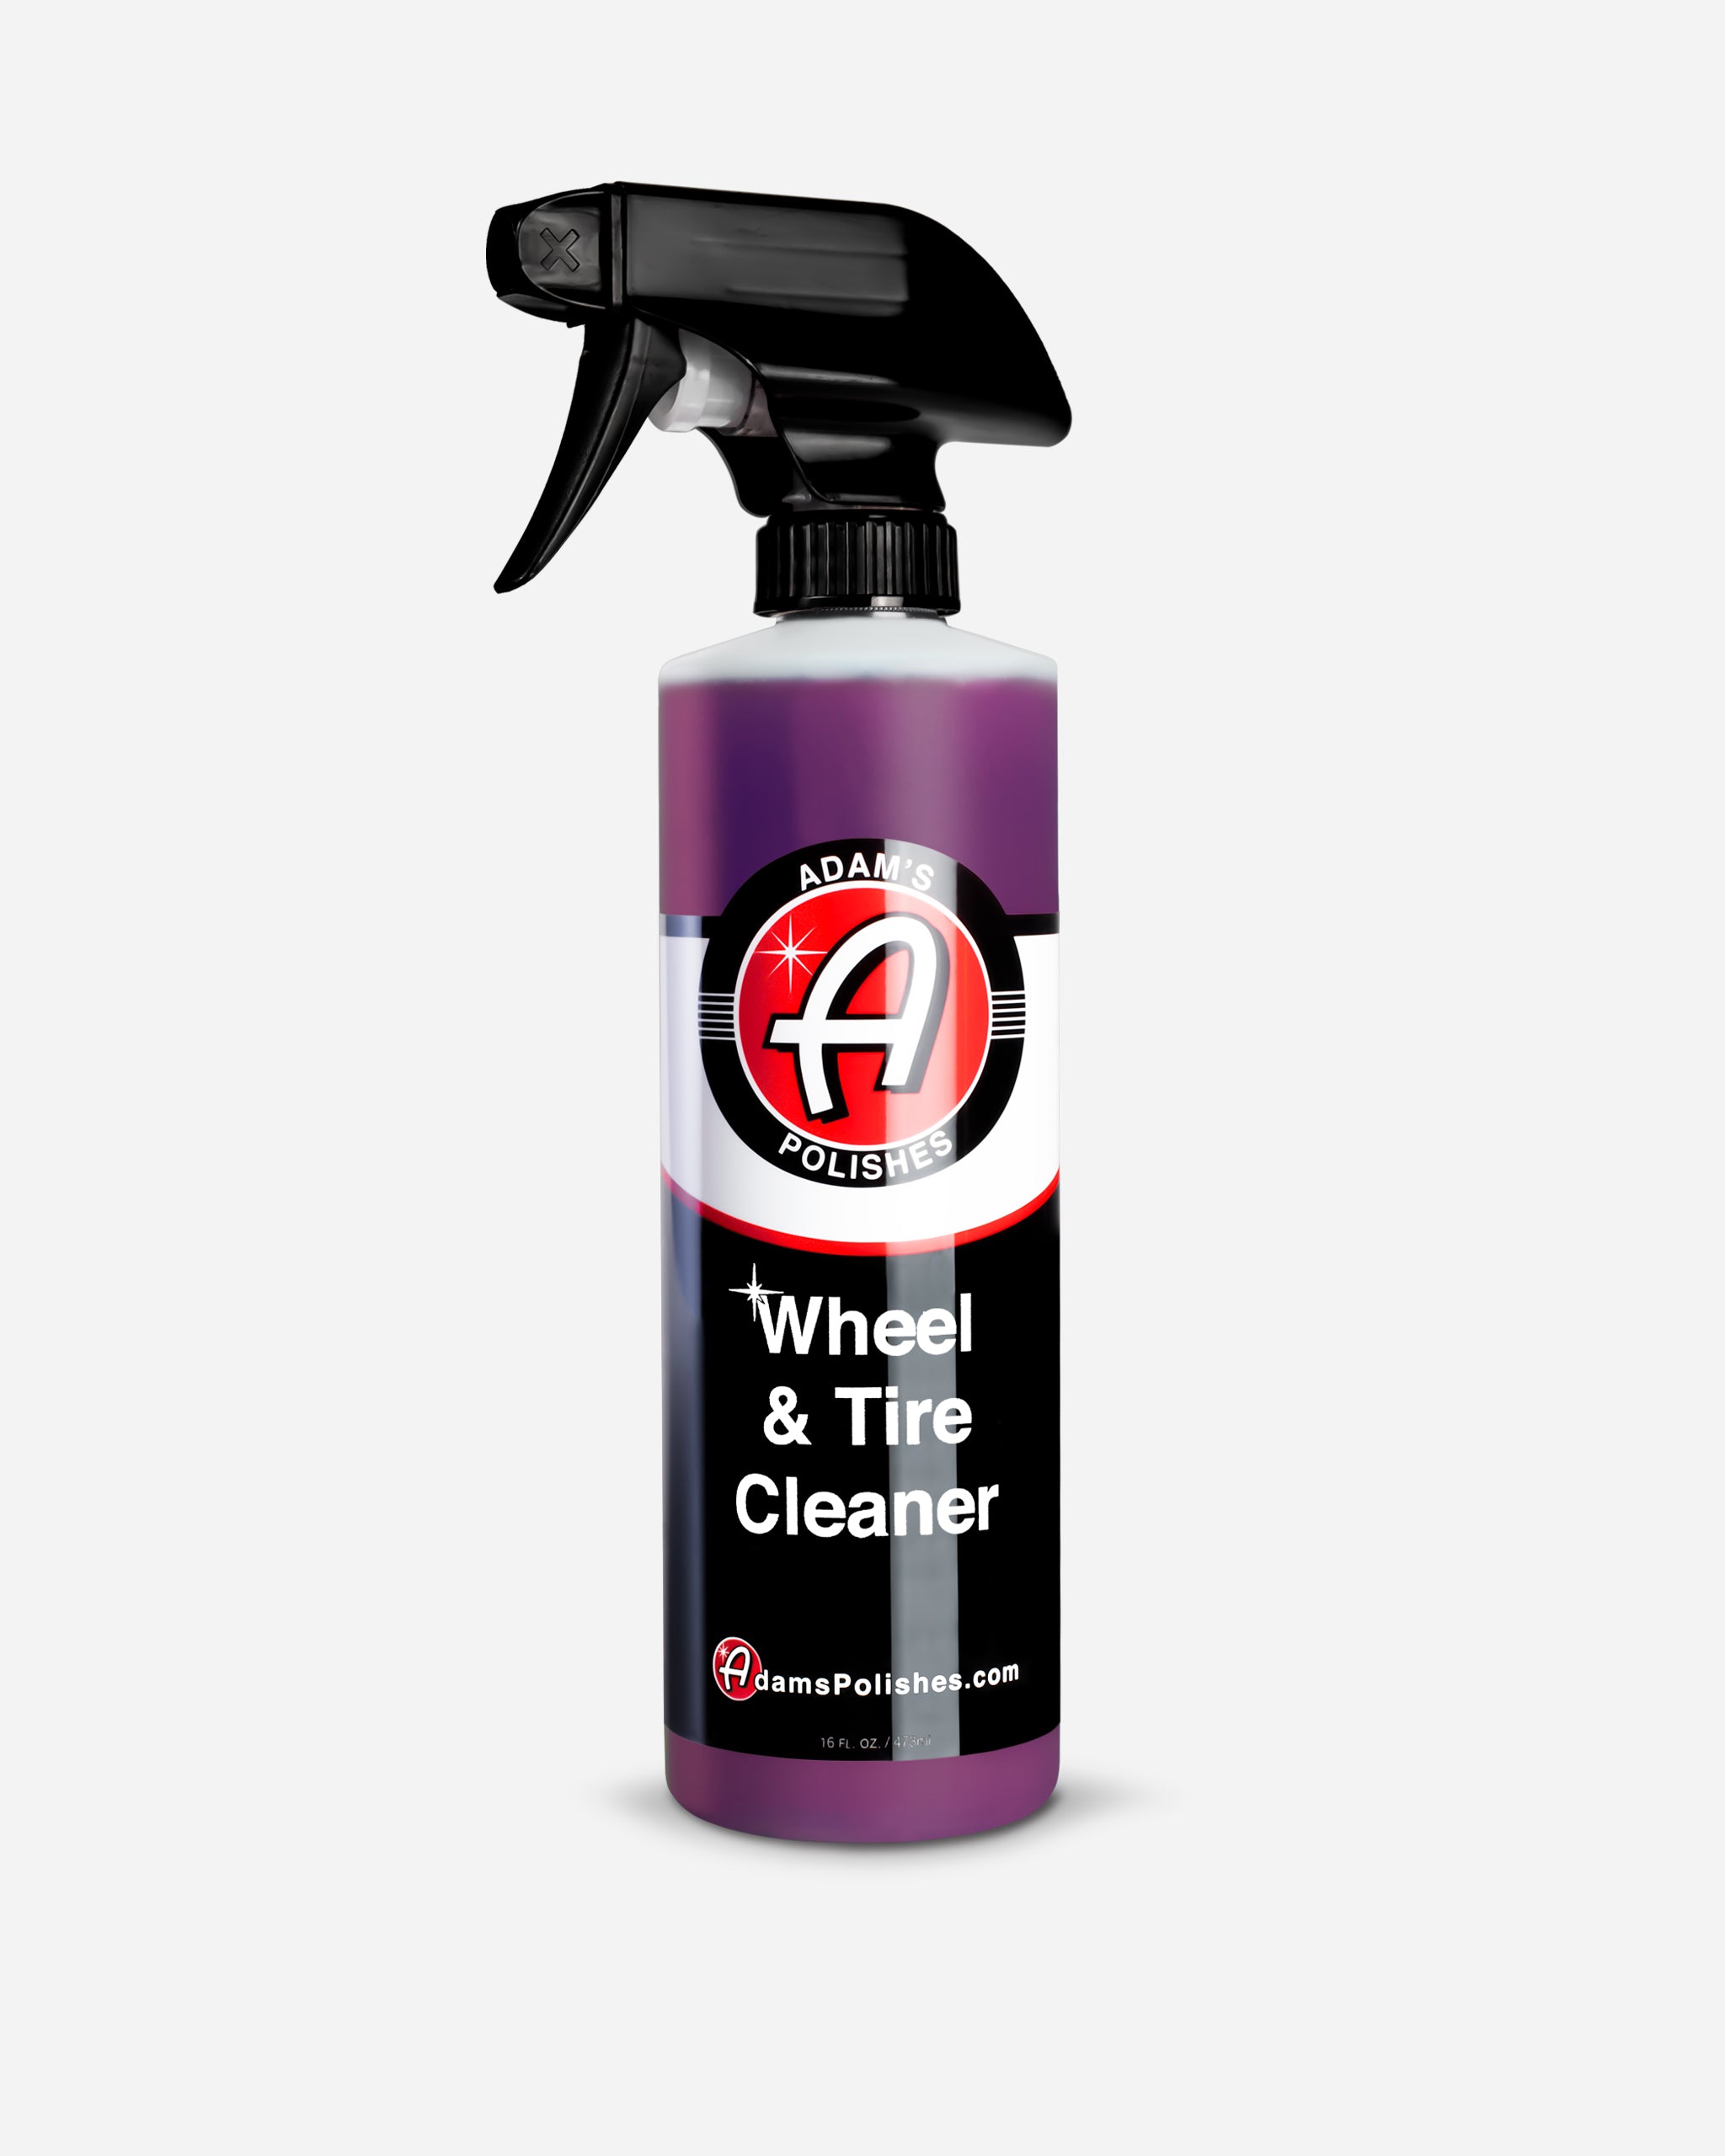 Adam’s Wheel & Tire Cleaner 5 Gallon - Professional All in One Tire & Wheel Cleaner w/Wheel Brush & Tire Brush | Car Wash Wheel Cleaning Spray for Car